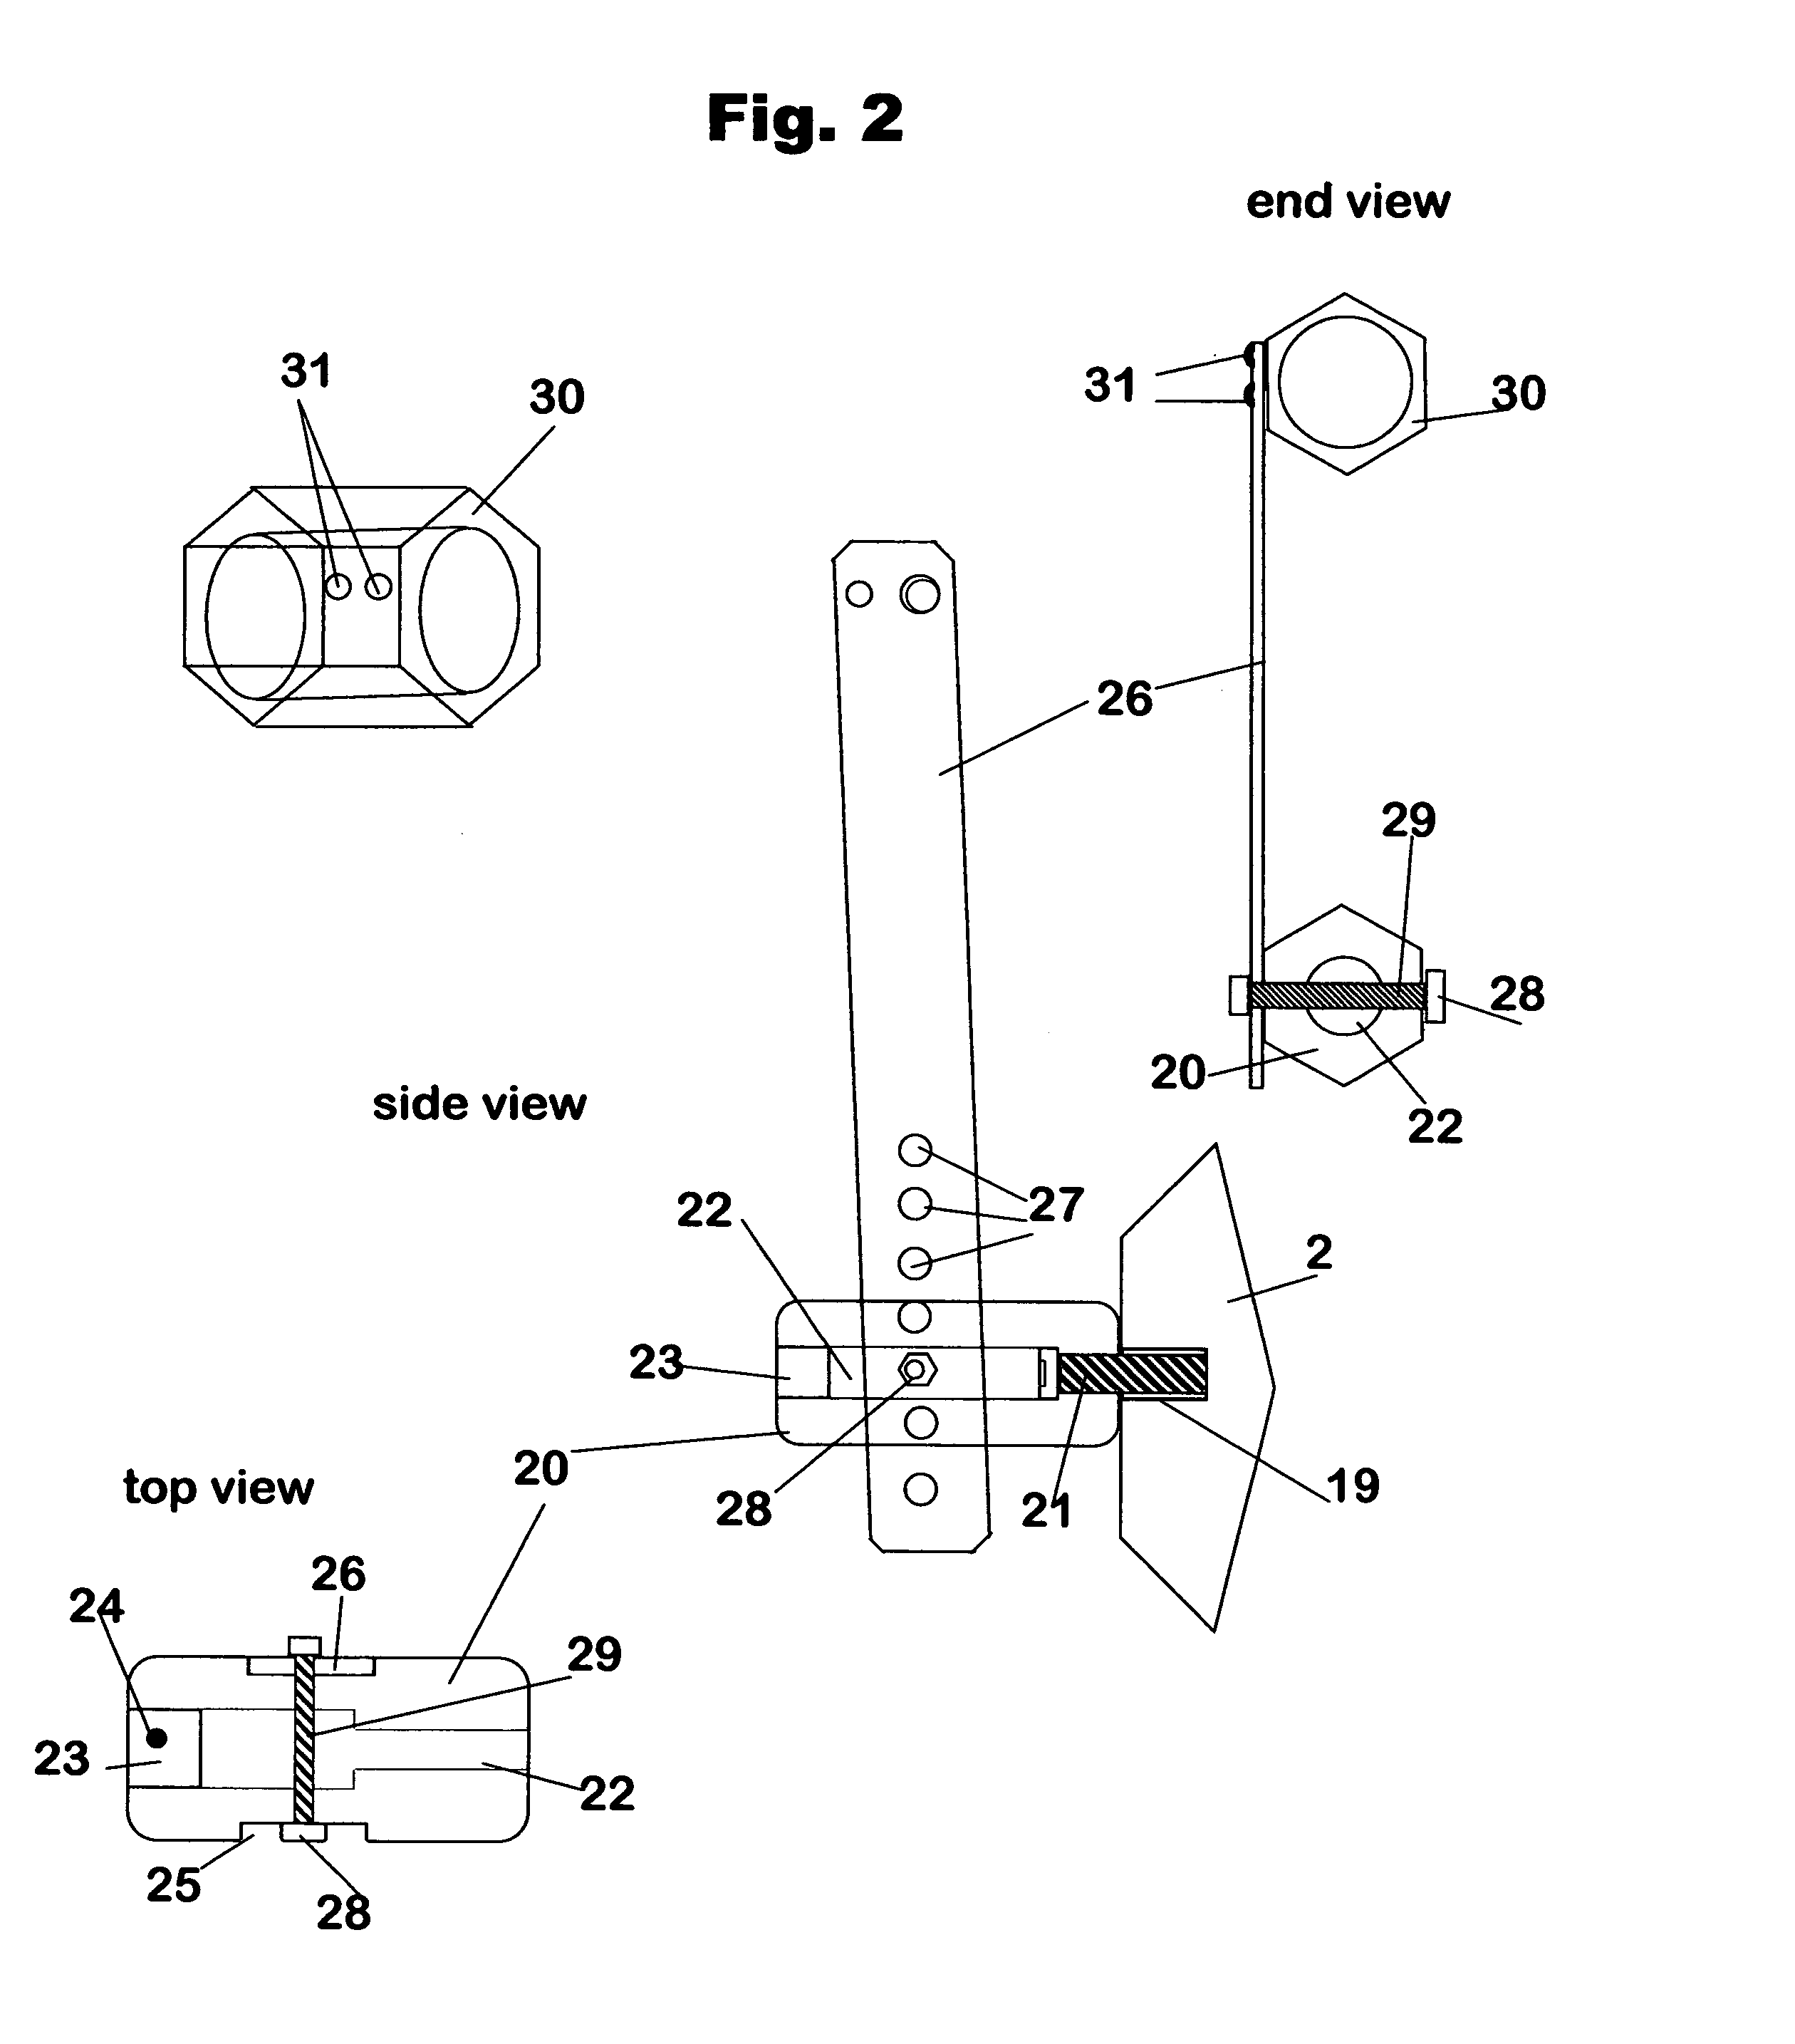 Laser-equipped pneumatic training aid for safe drawing of the bowstring